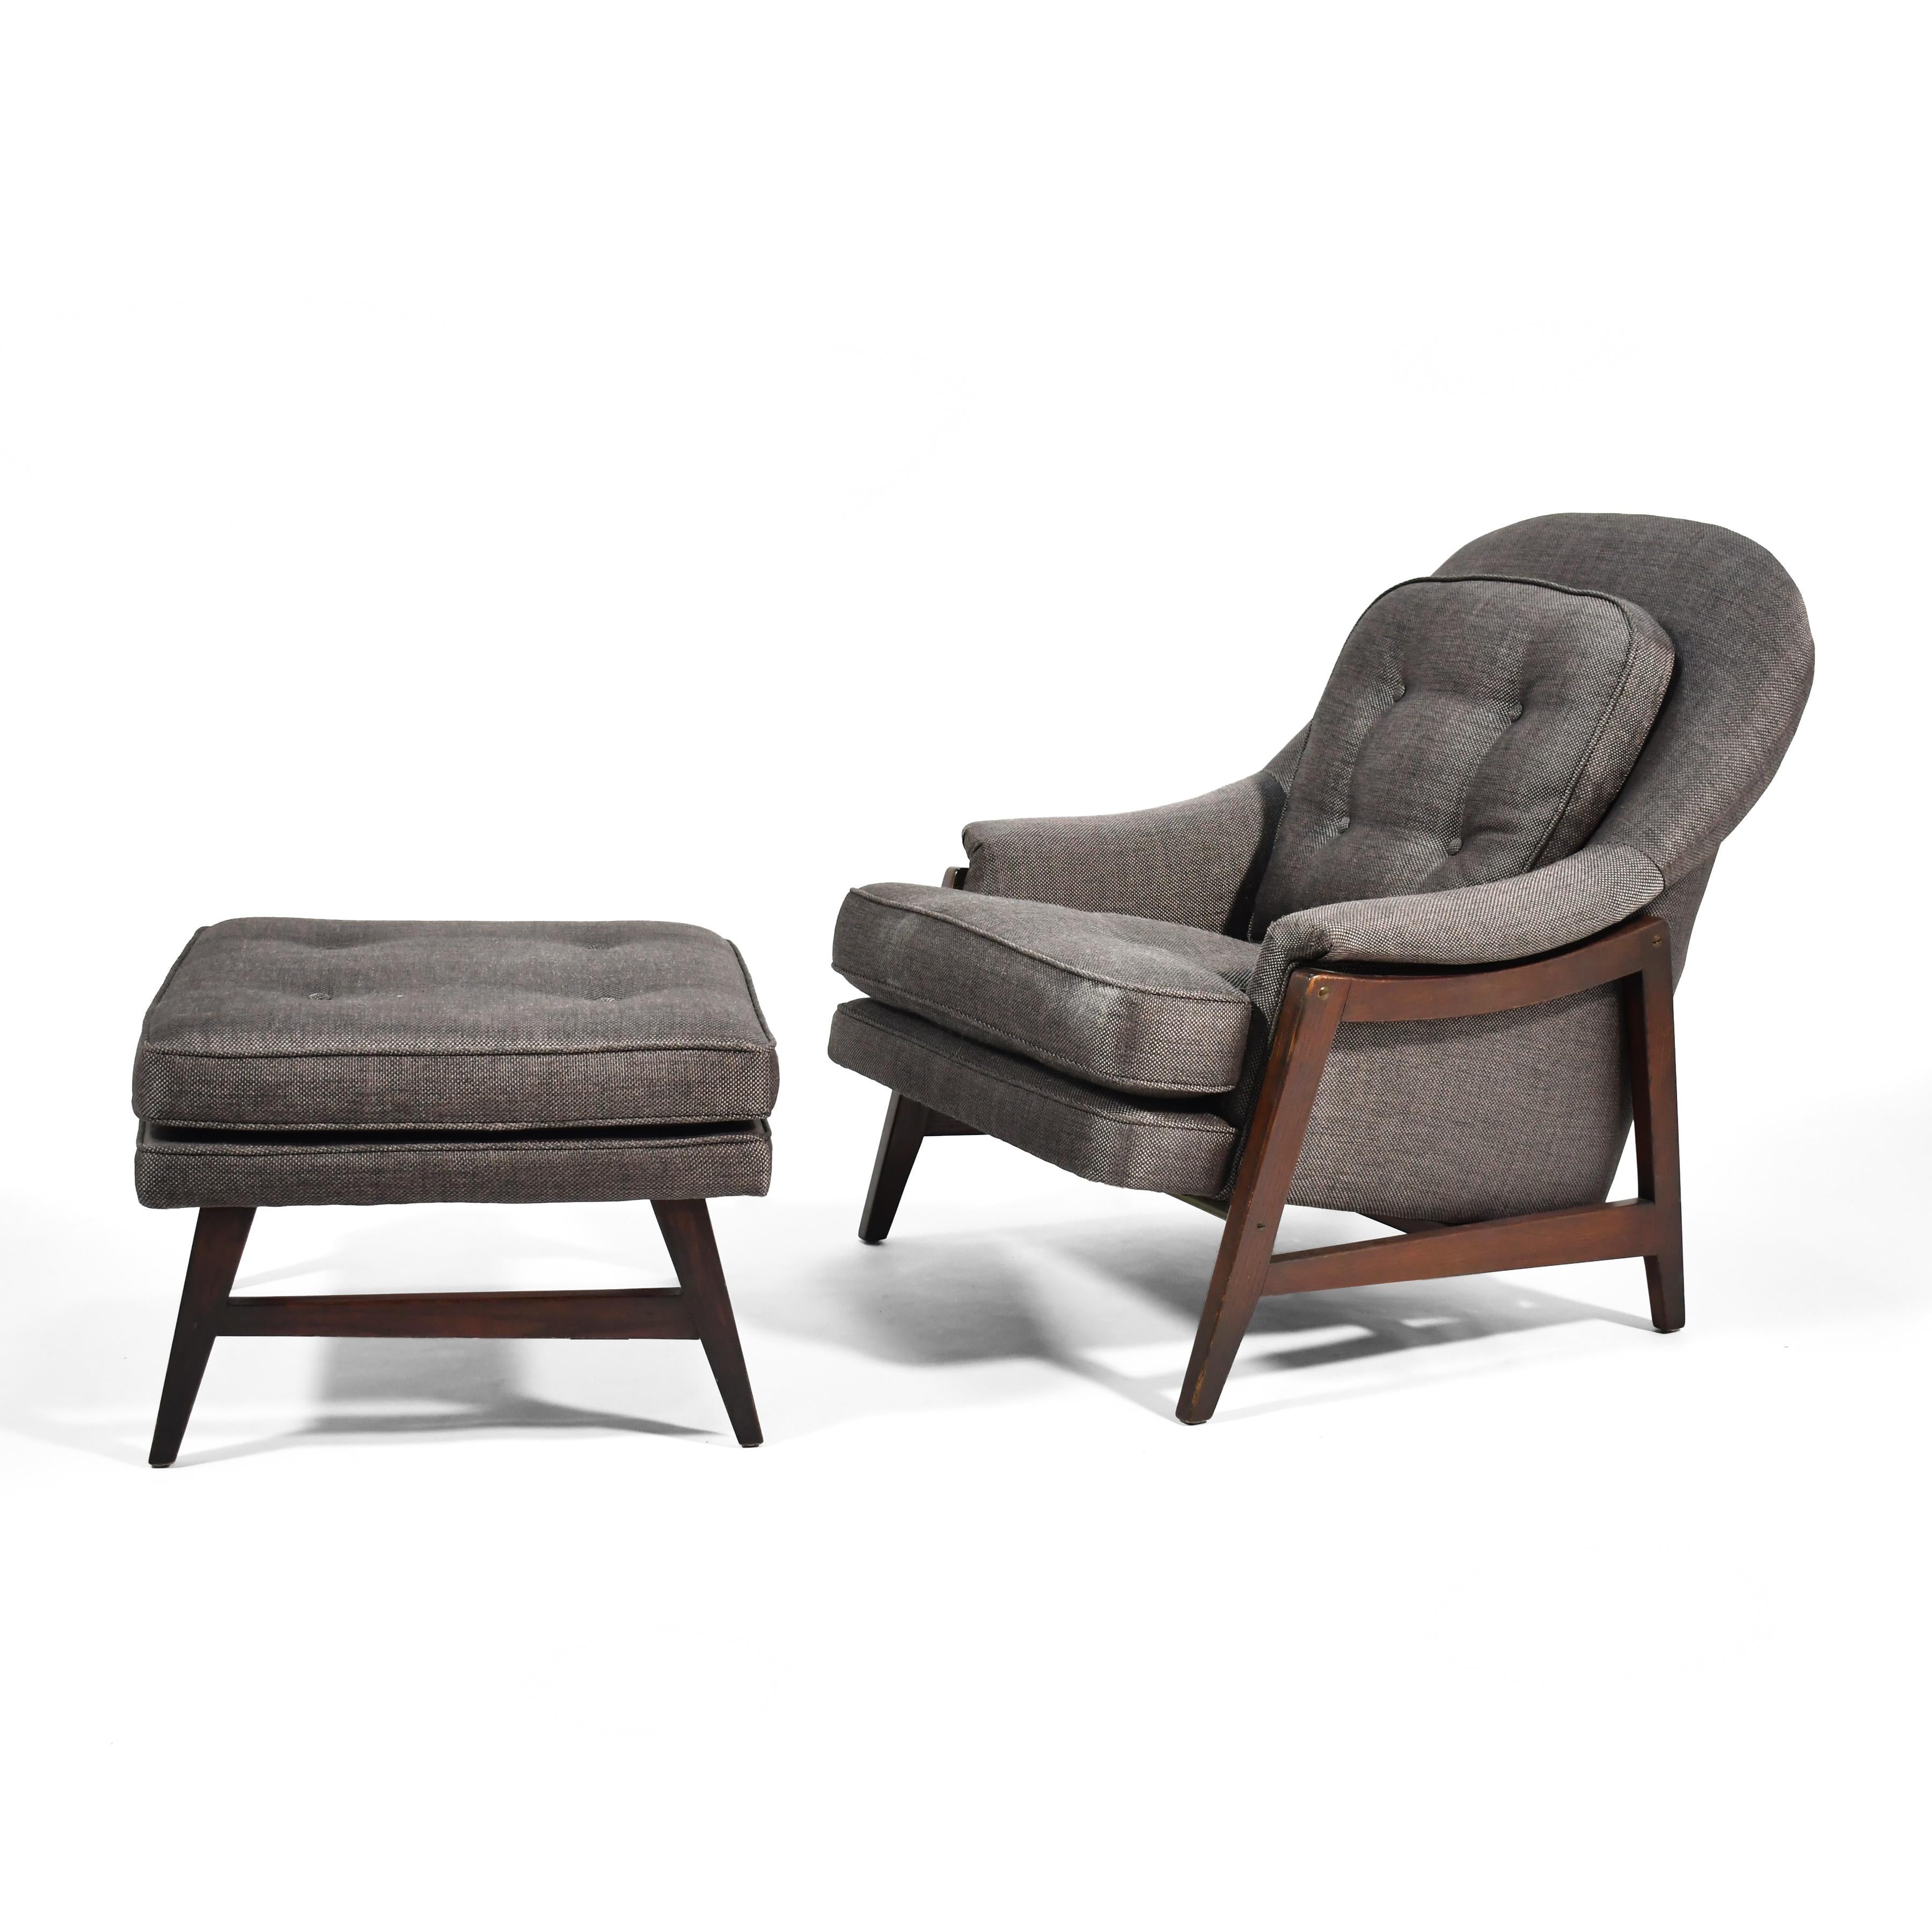 Mid-20th Century Edward Wormley Model 5701 Lounge Chair & Ottoman For Sale